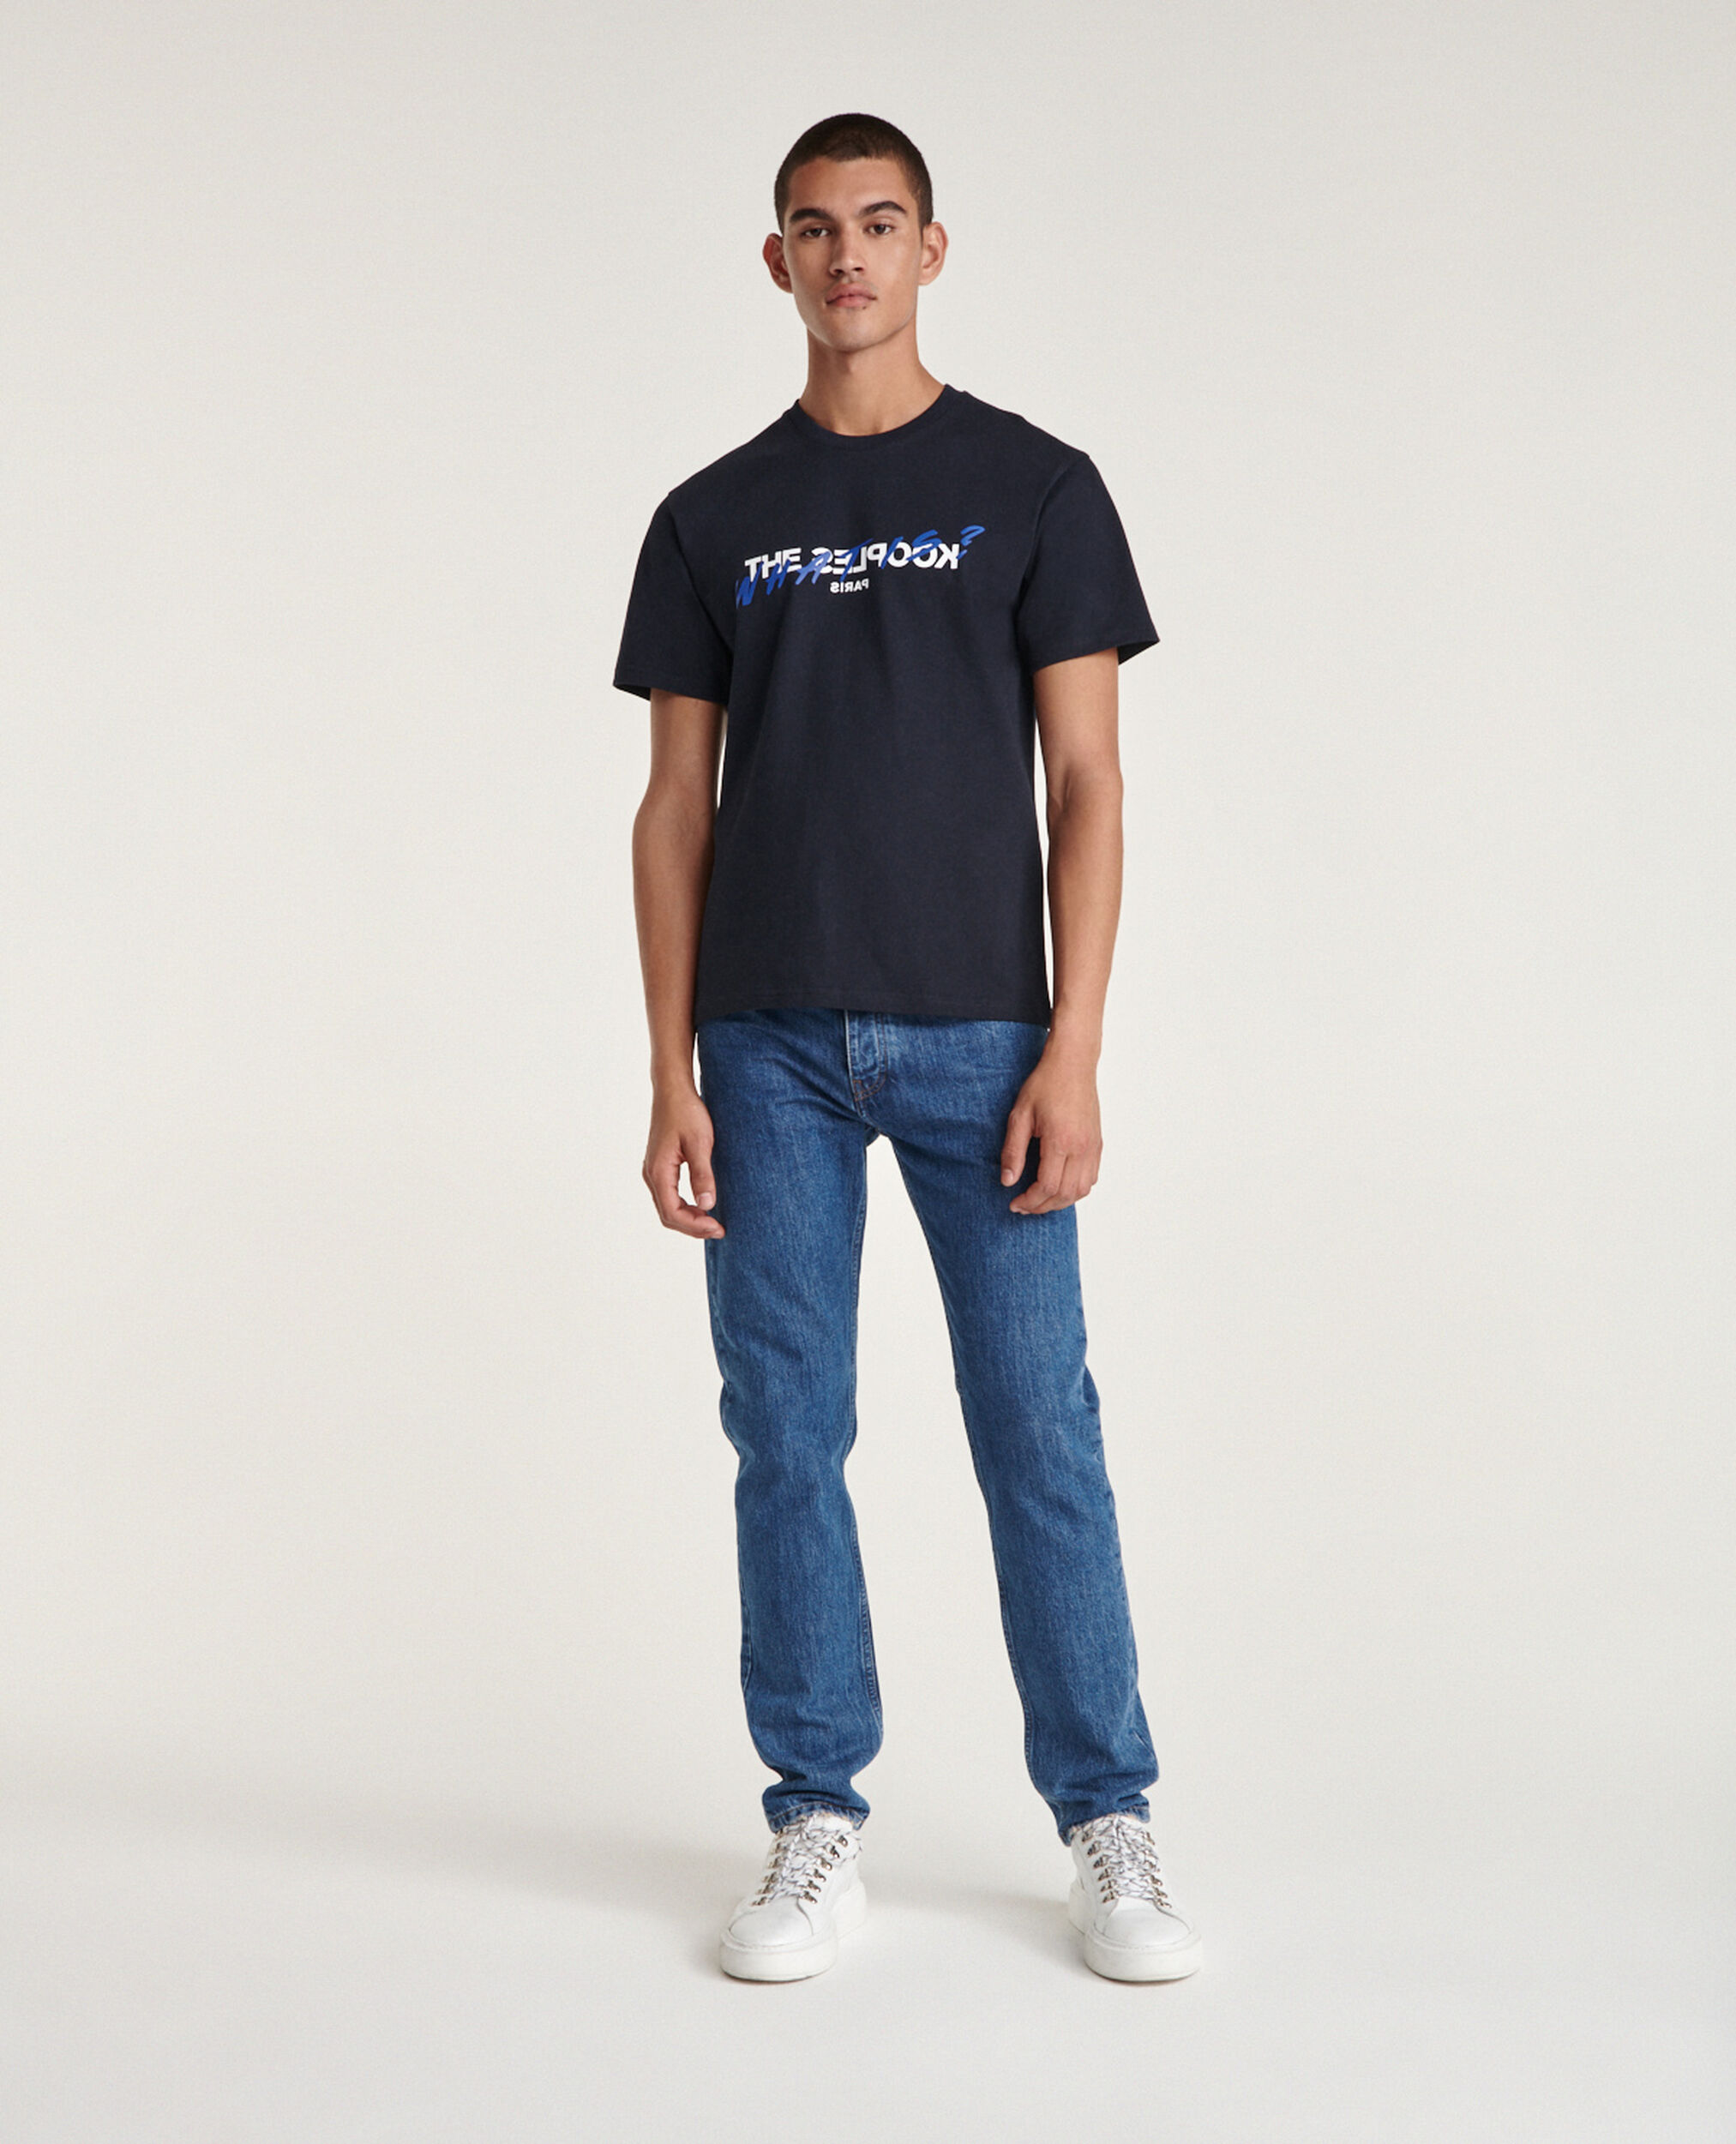 T-SHIRT MARINE COTON IMPRIMÉ WHAT IS, NAVY, hi-res image number null